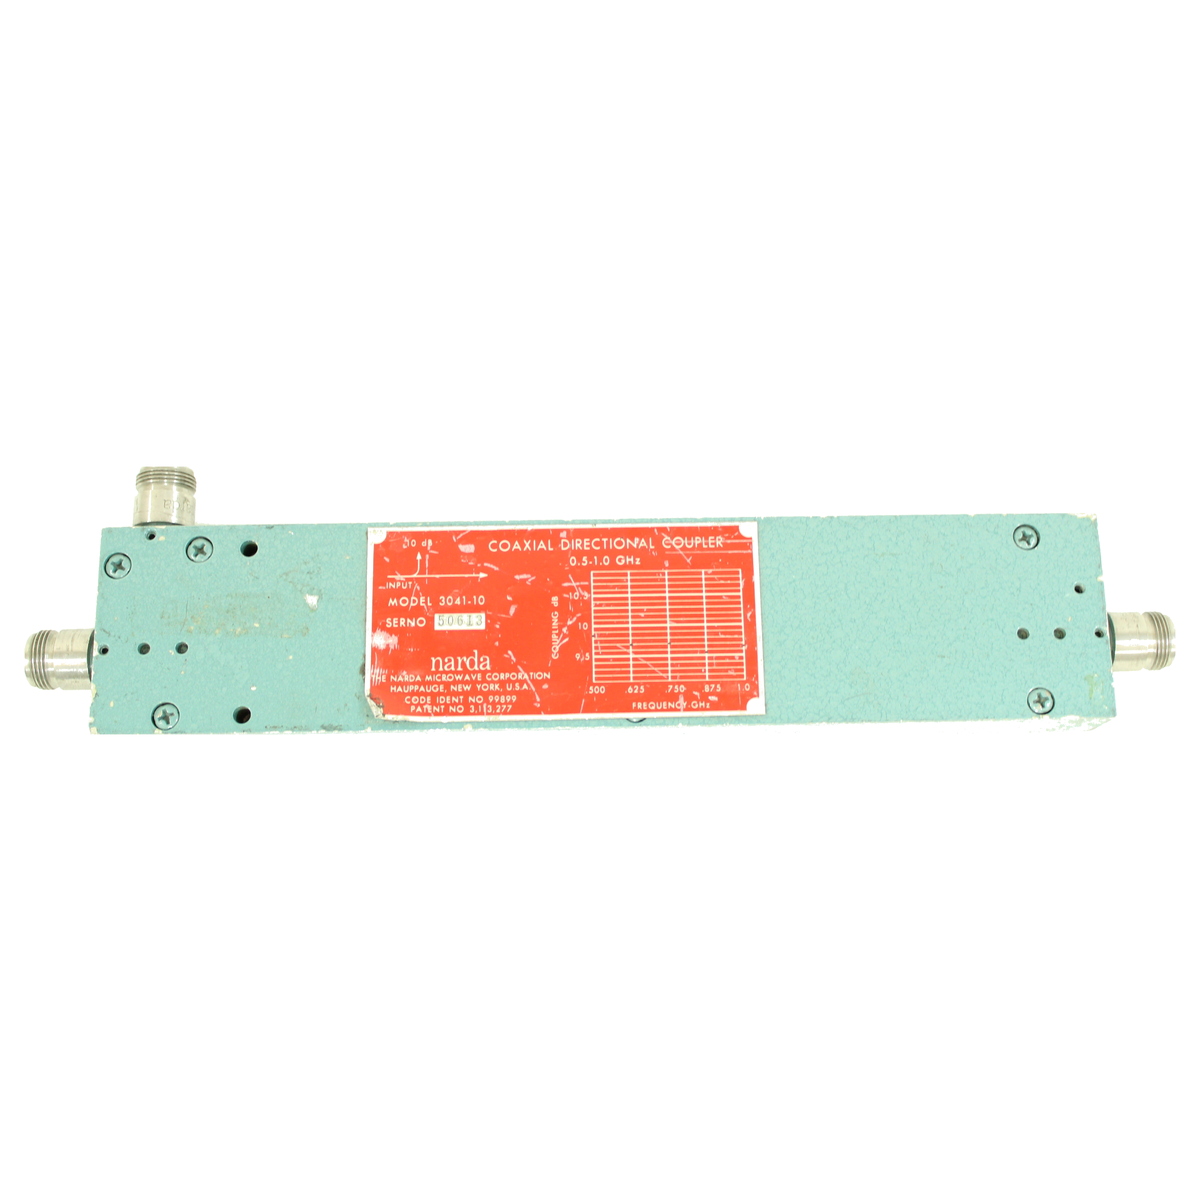 NARDA 3041 500 TO 1000 MHz COAXIAL DIRECTIONAL COUPLER; TYPE N -20